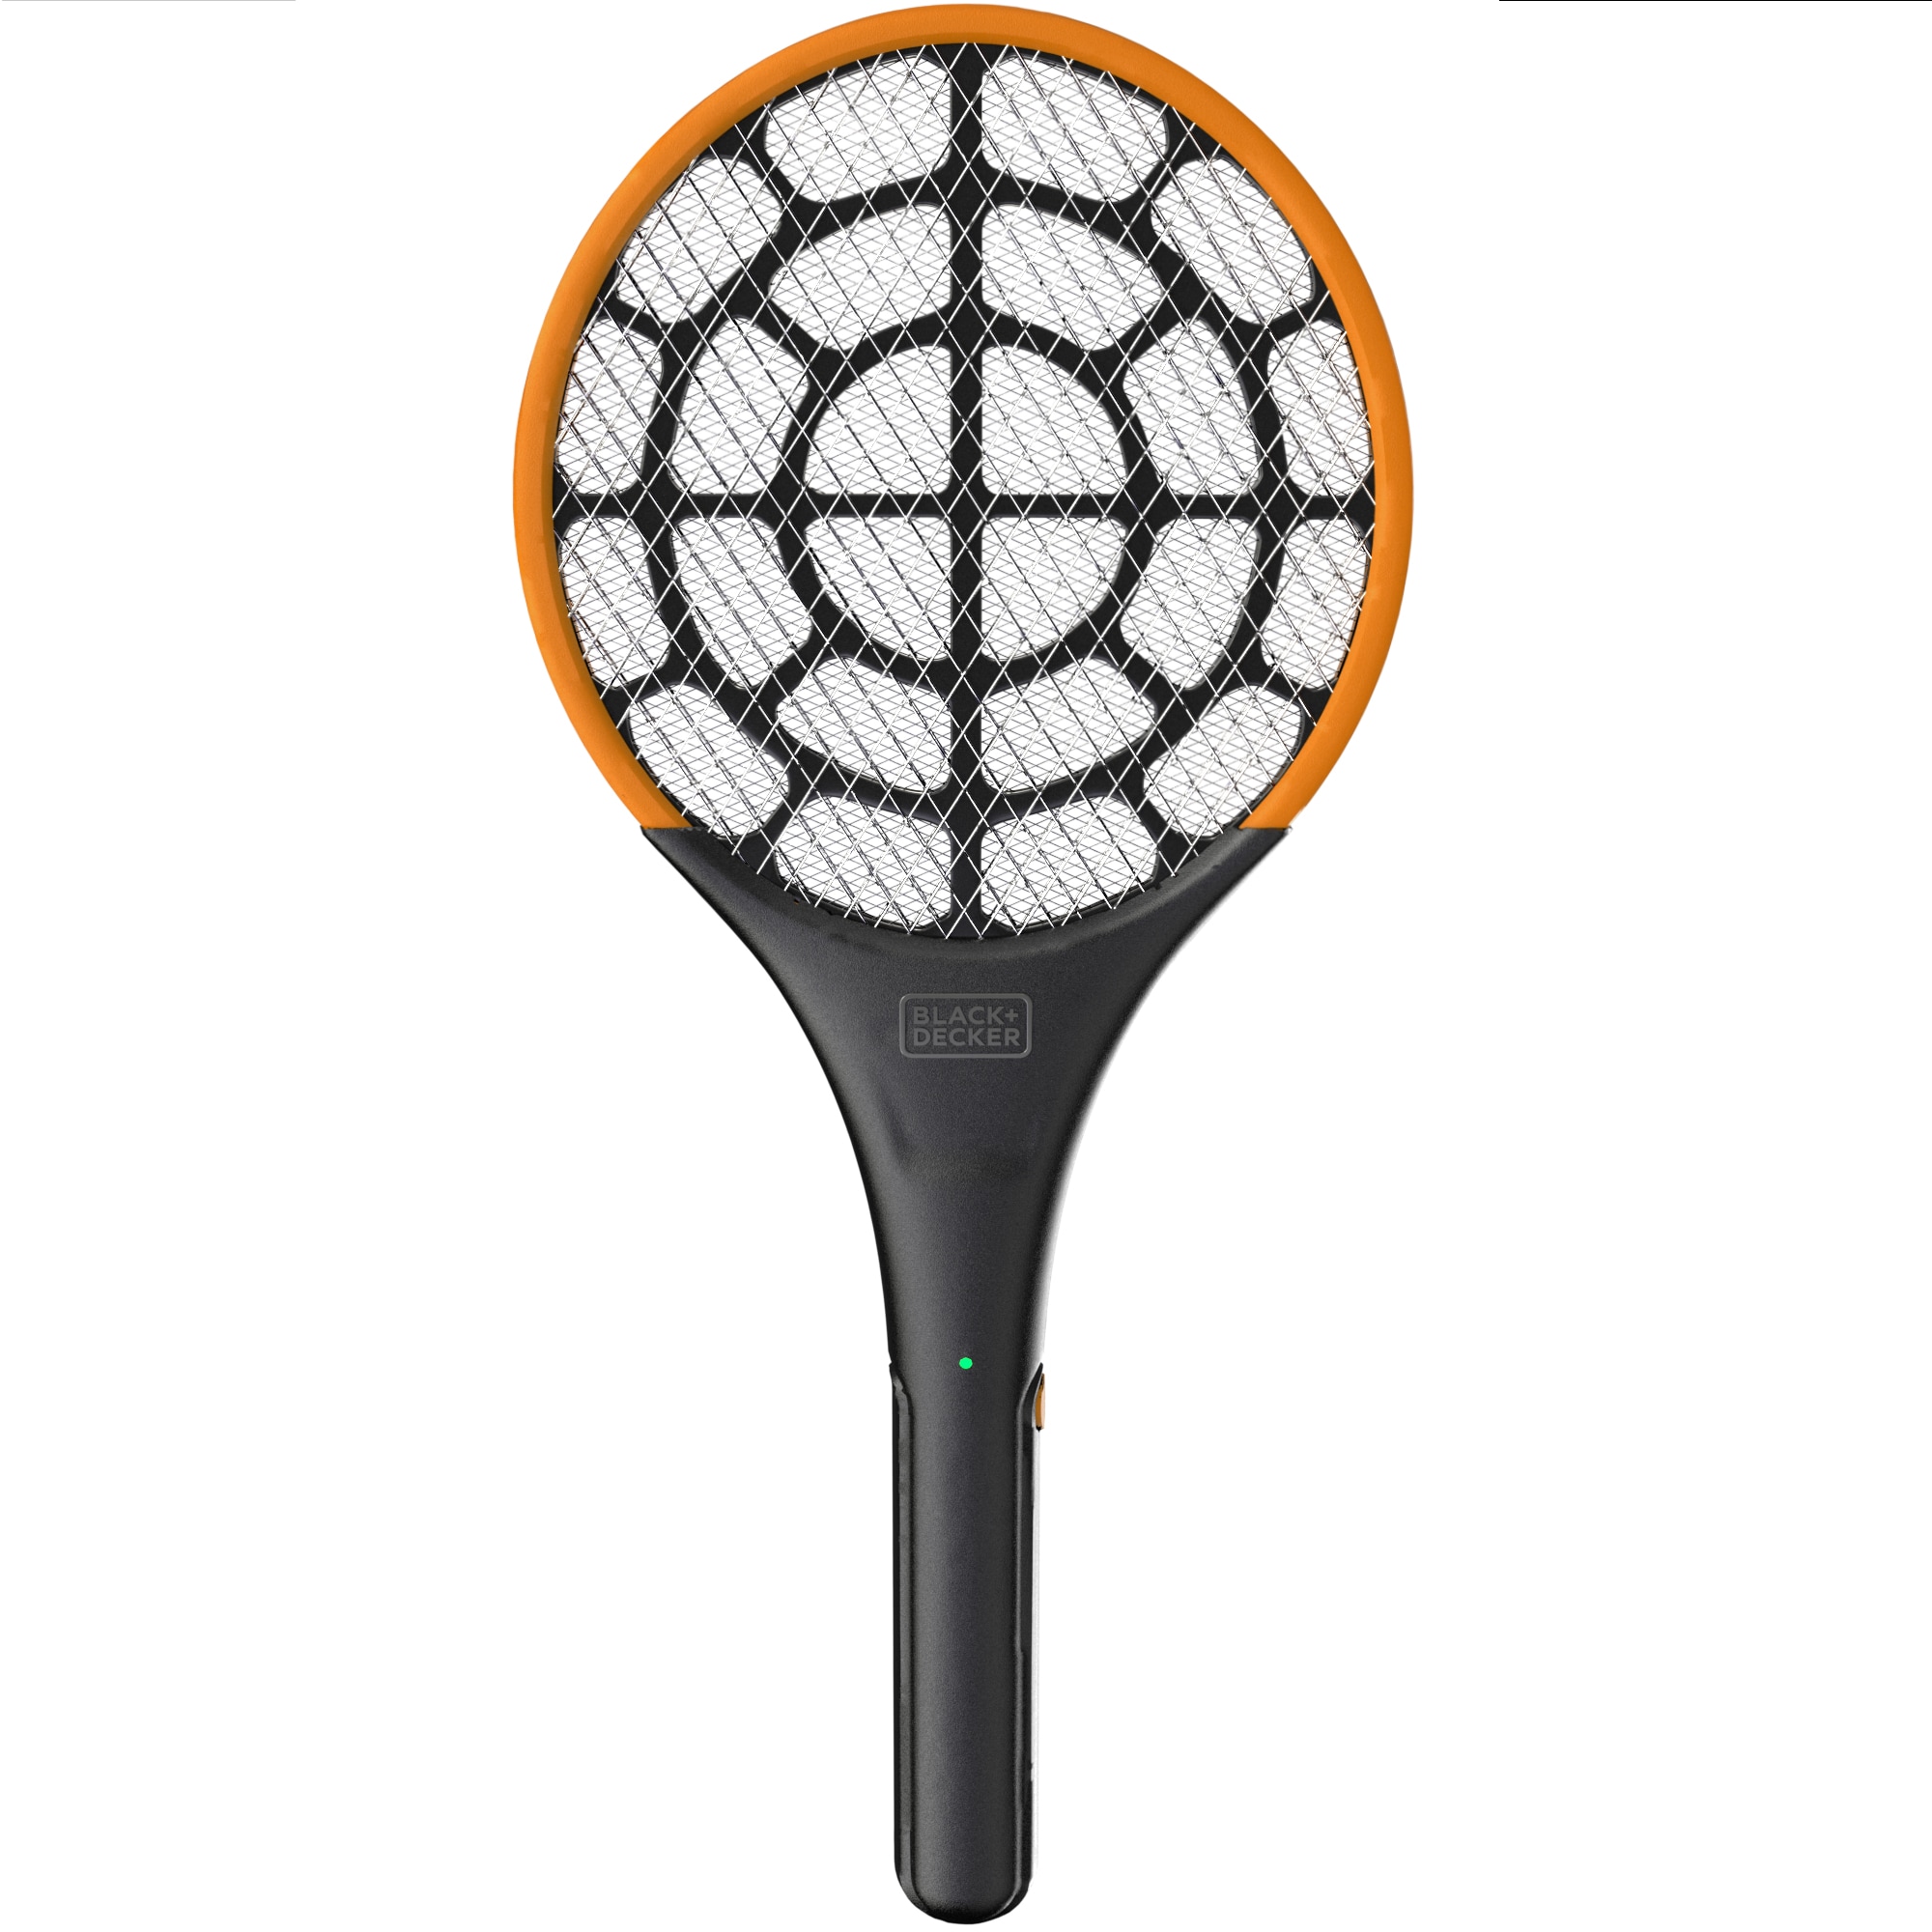 Insects Battery Power Electronic Fly Swatter Mosquito Killer Bug Zapper Racket 